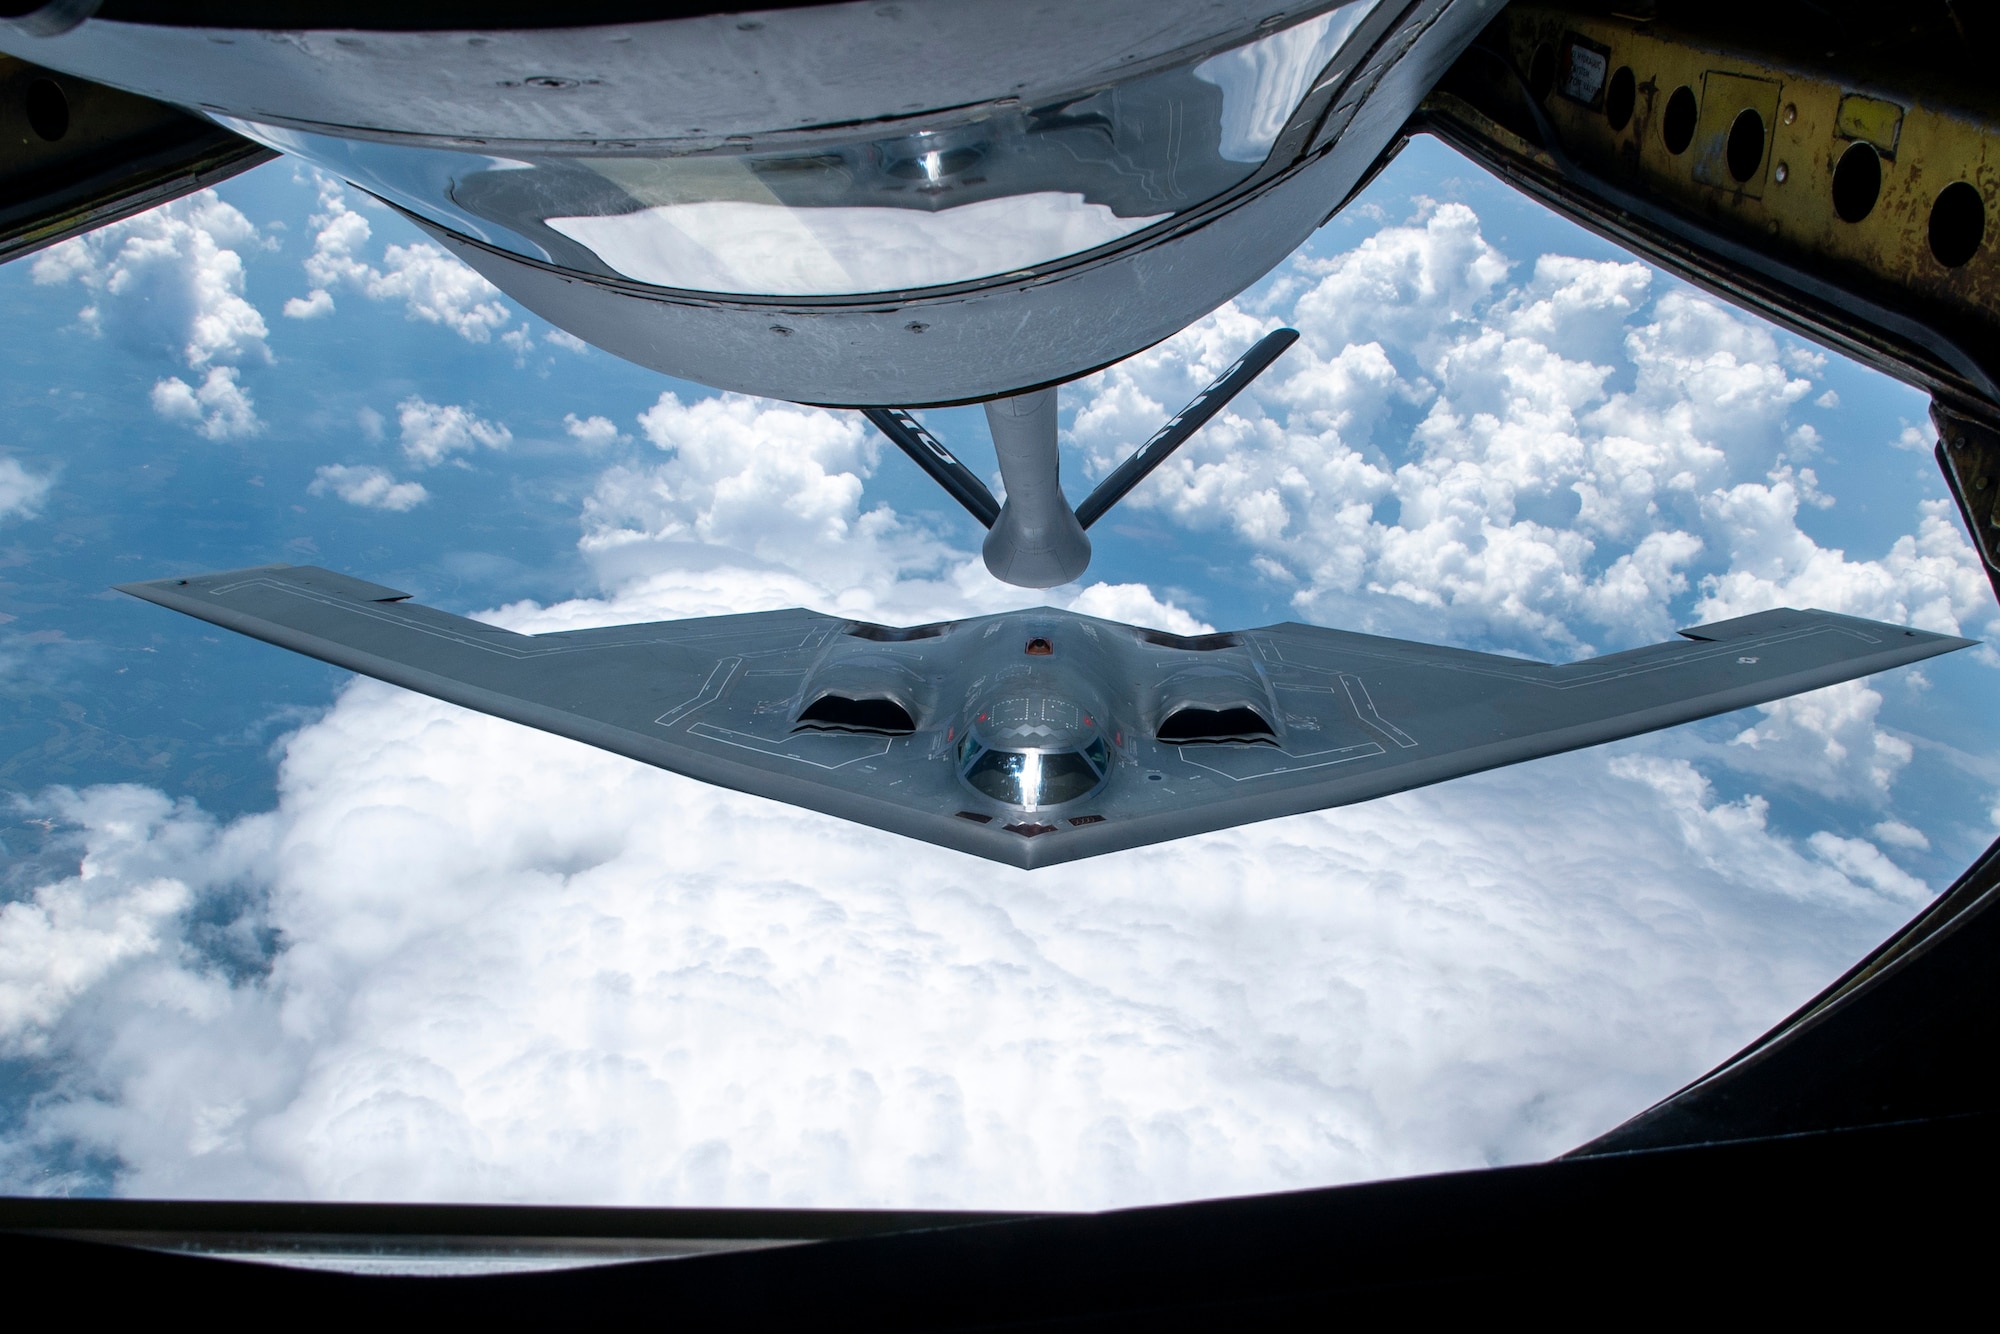 A KC-135 Stratotanker from the 121st Air Refueling Wing refuels a Northrop Grumman B-2 Spirit over the skies of Missouri, June 7, 2023. The KC-135 enables the B-2, also known as the Stealth Bomber, to bring massive firepower to bear, in a short time, anywhere on the globe through previously impenetrable defenses. (U.S. Air National Guard Photo by Airman First Class Ivy Thomas)